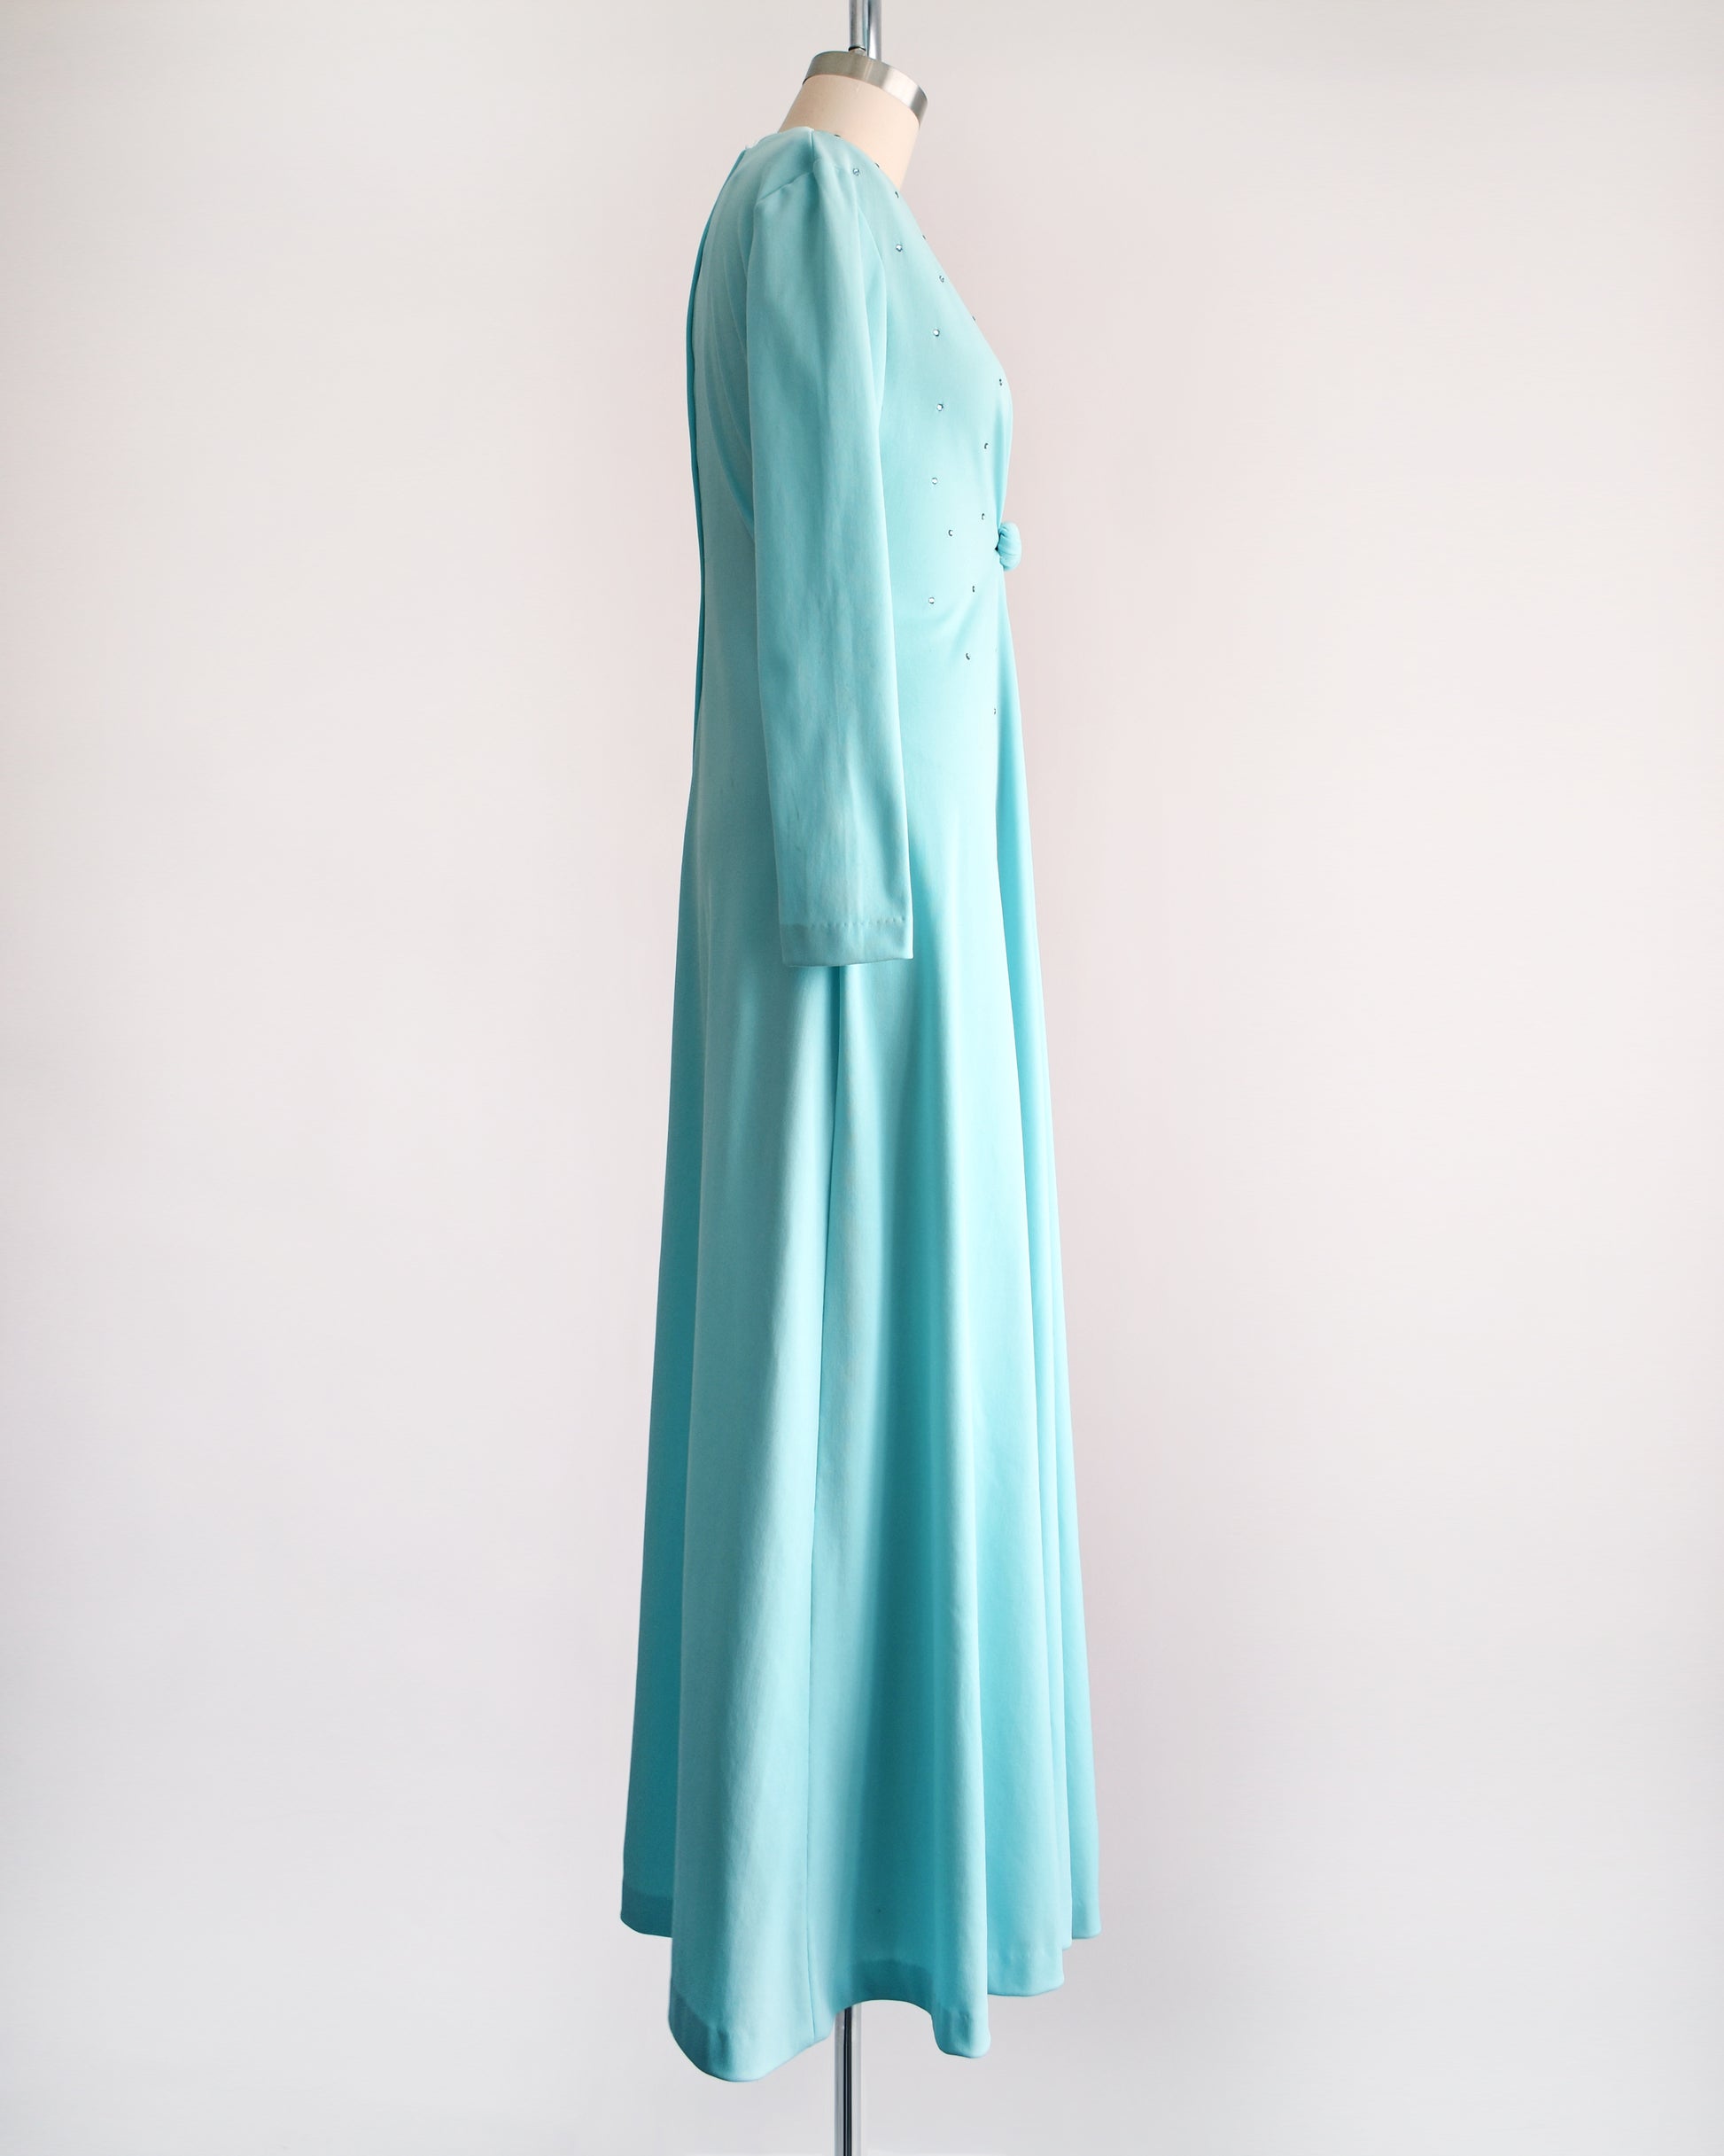 side view of a vintage 1970s light blue maxi dress that has rhinestones on the bodice, a plunging v-neckline, and long sleeves